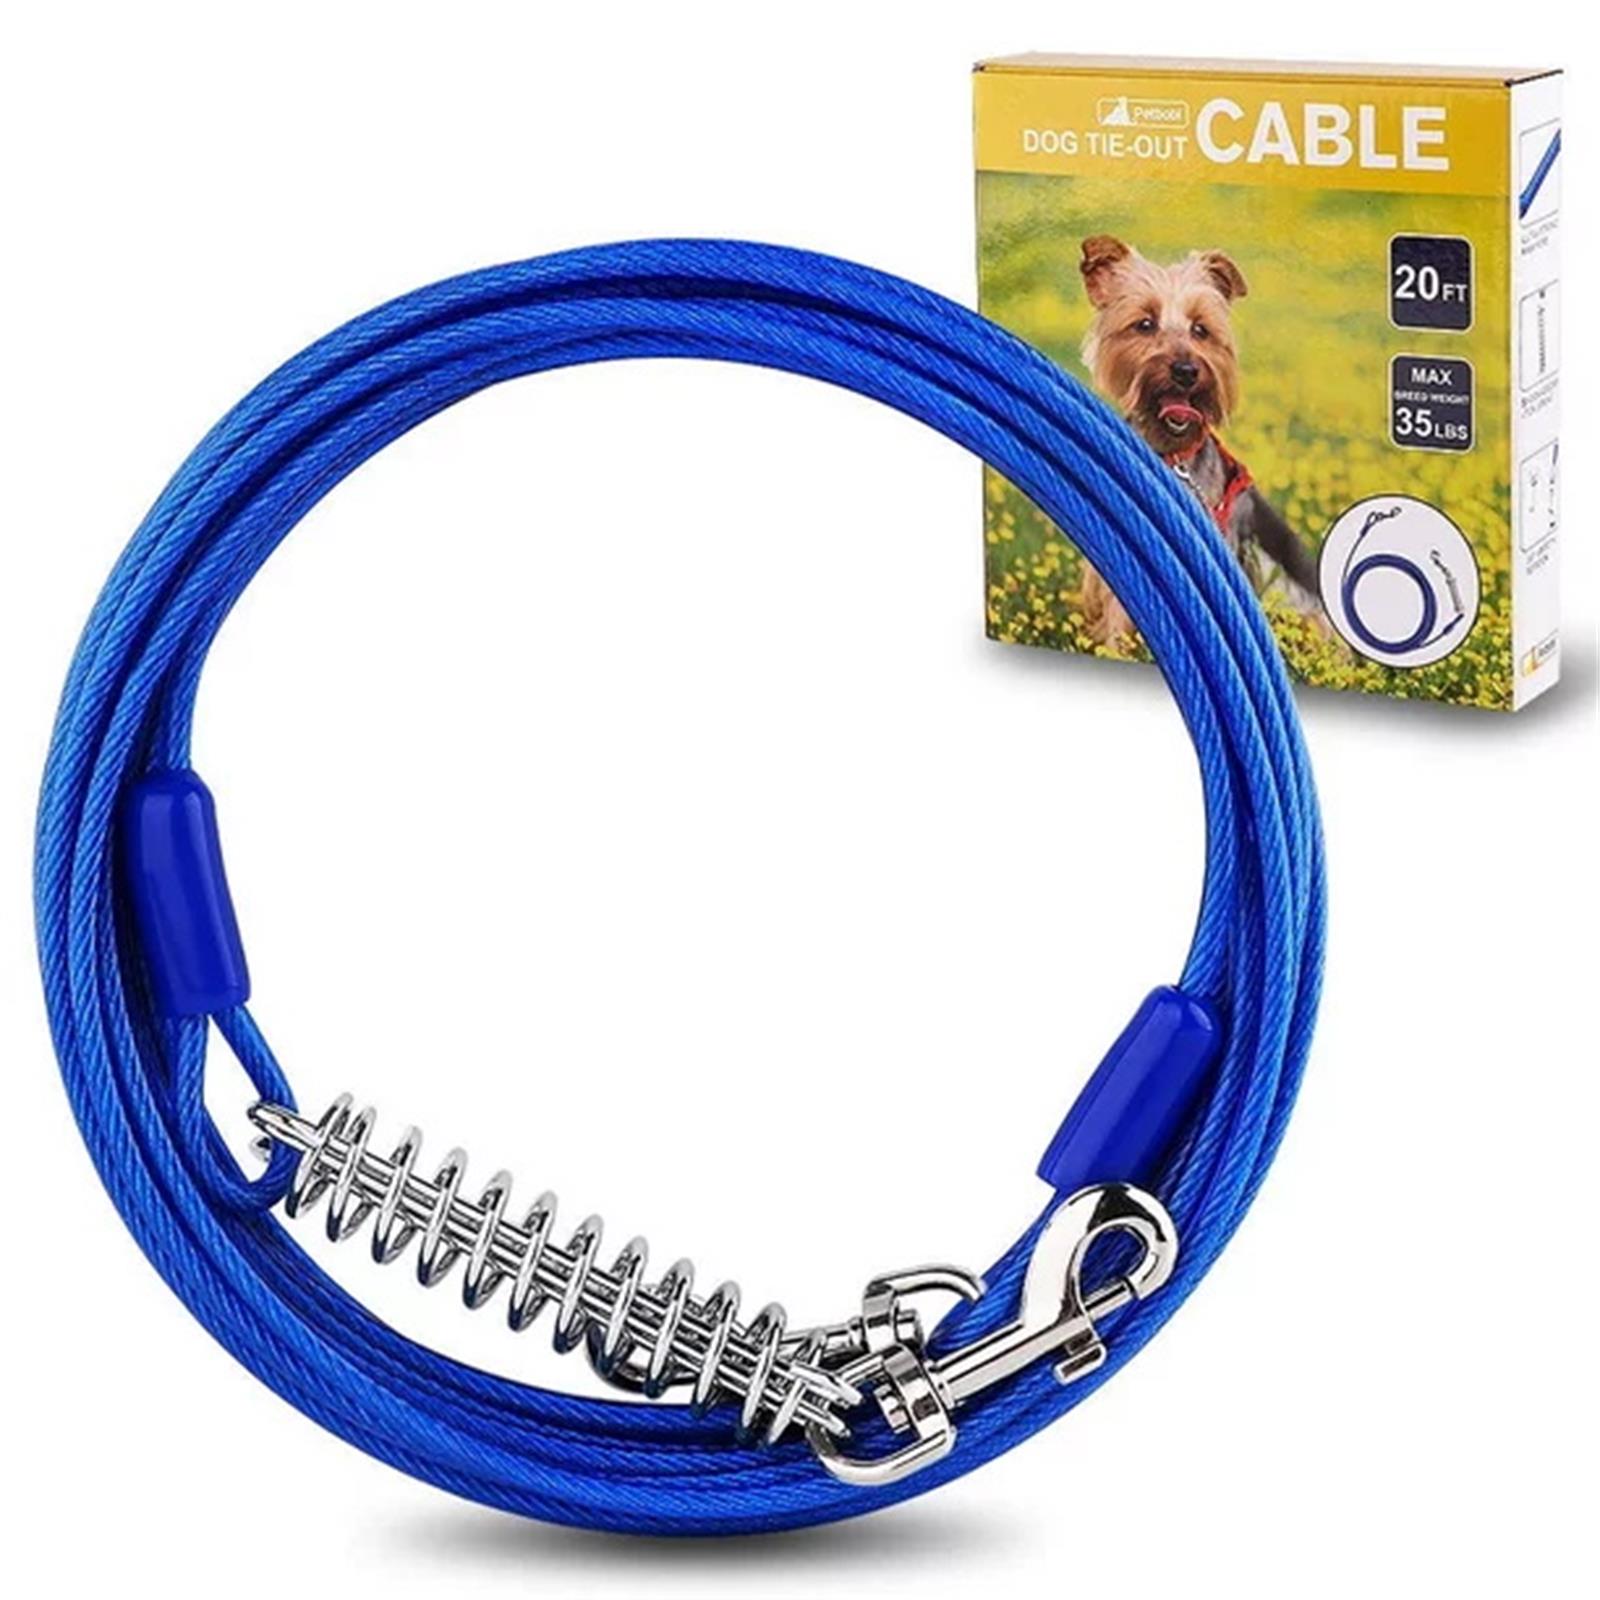 Dog Tie-Out Cable Set - 20ft/35lbs